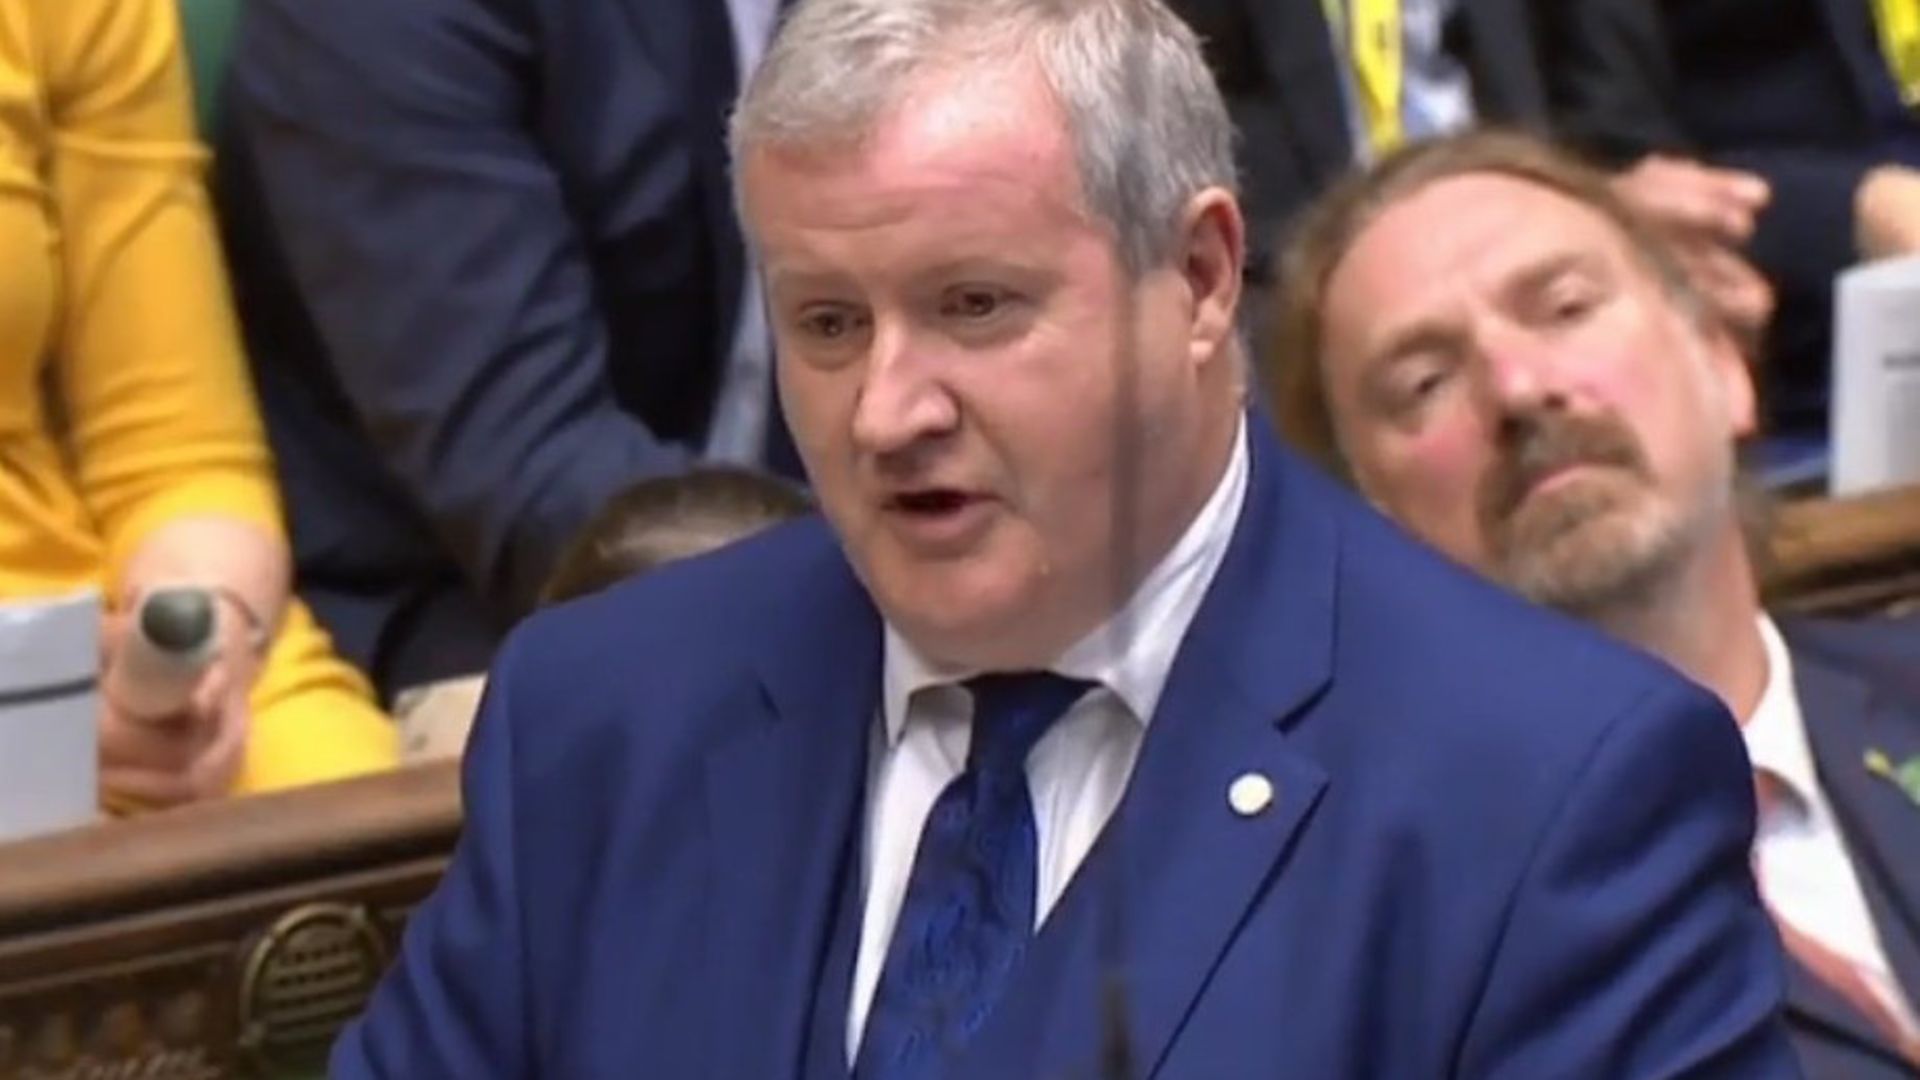 SNP Westminster leader Ian Blackford in the House of Commons. - Credit: Parliament TV